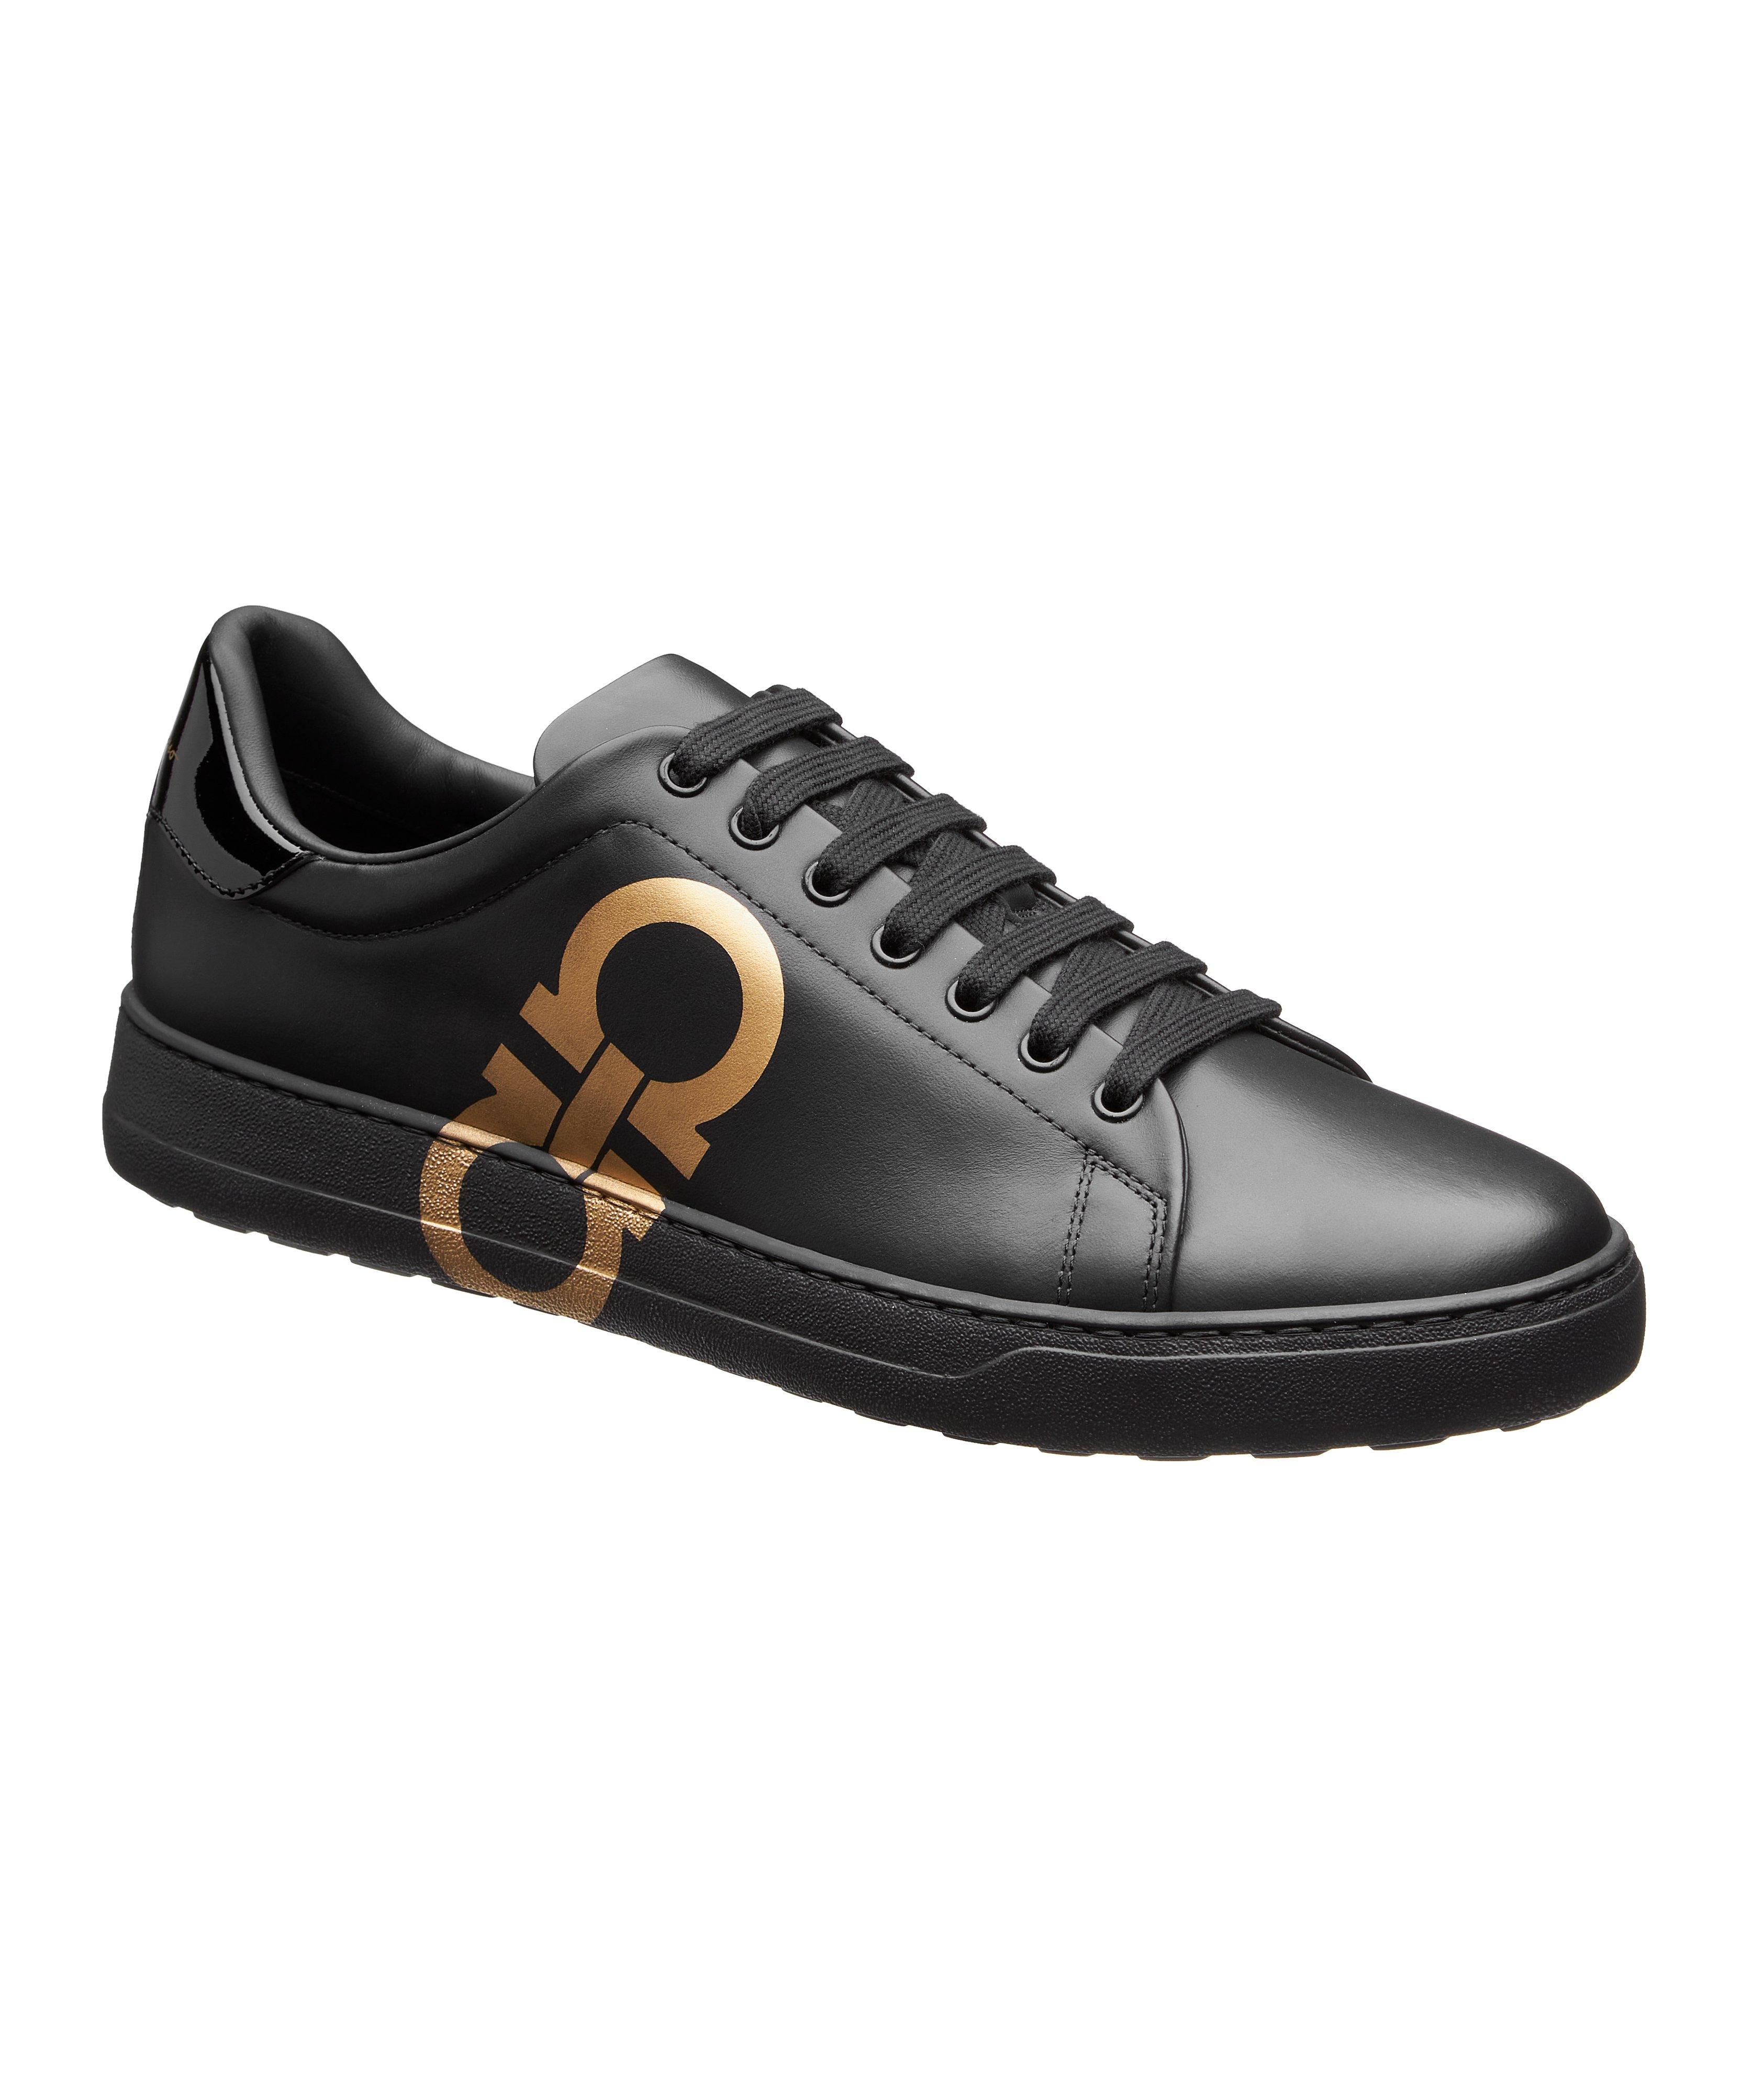 Number Leather Sneakers image 0